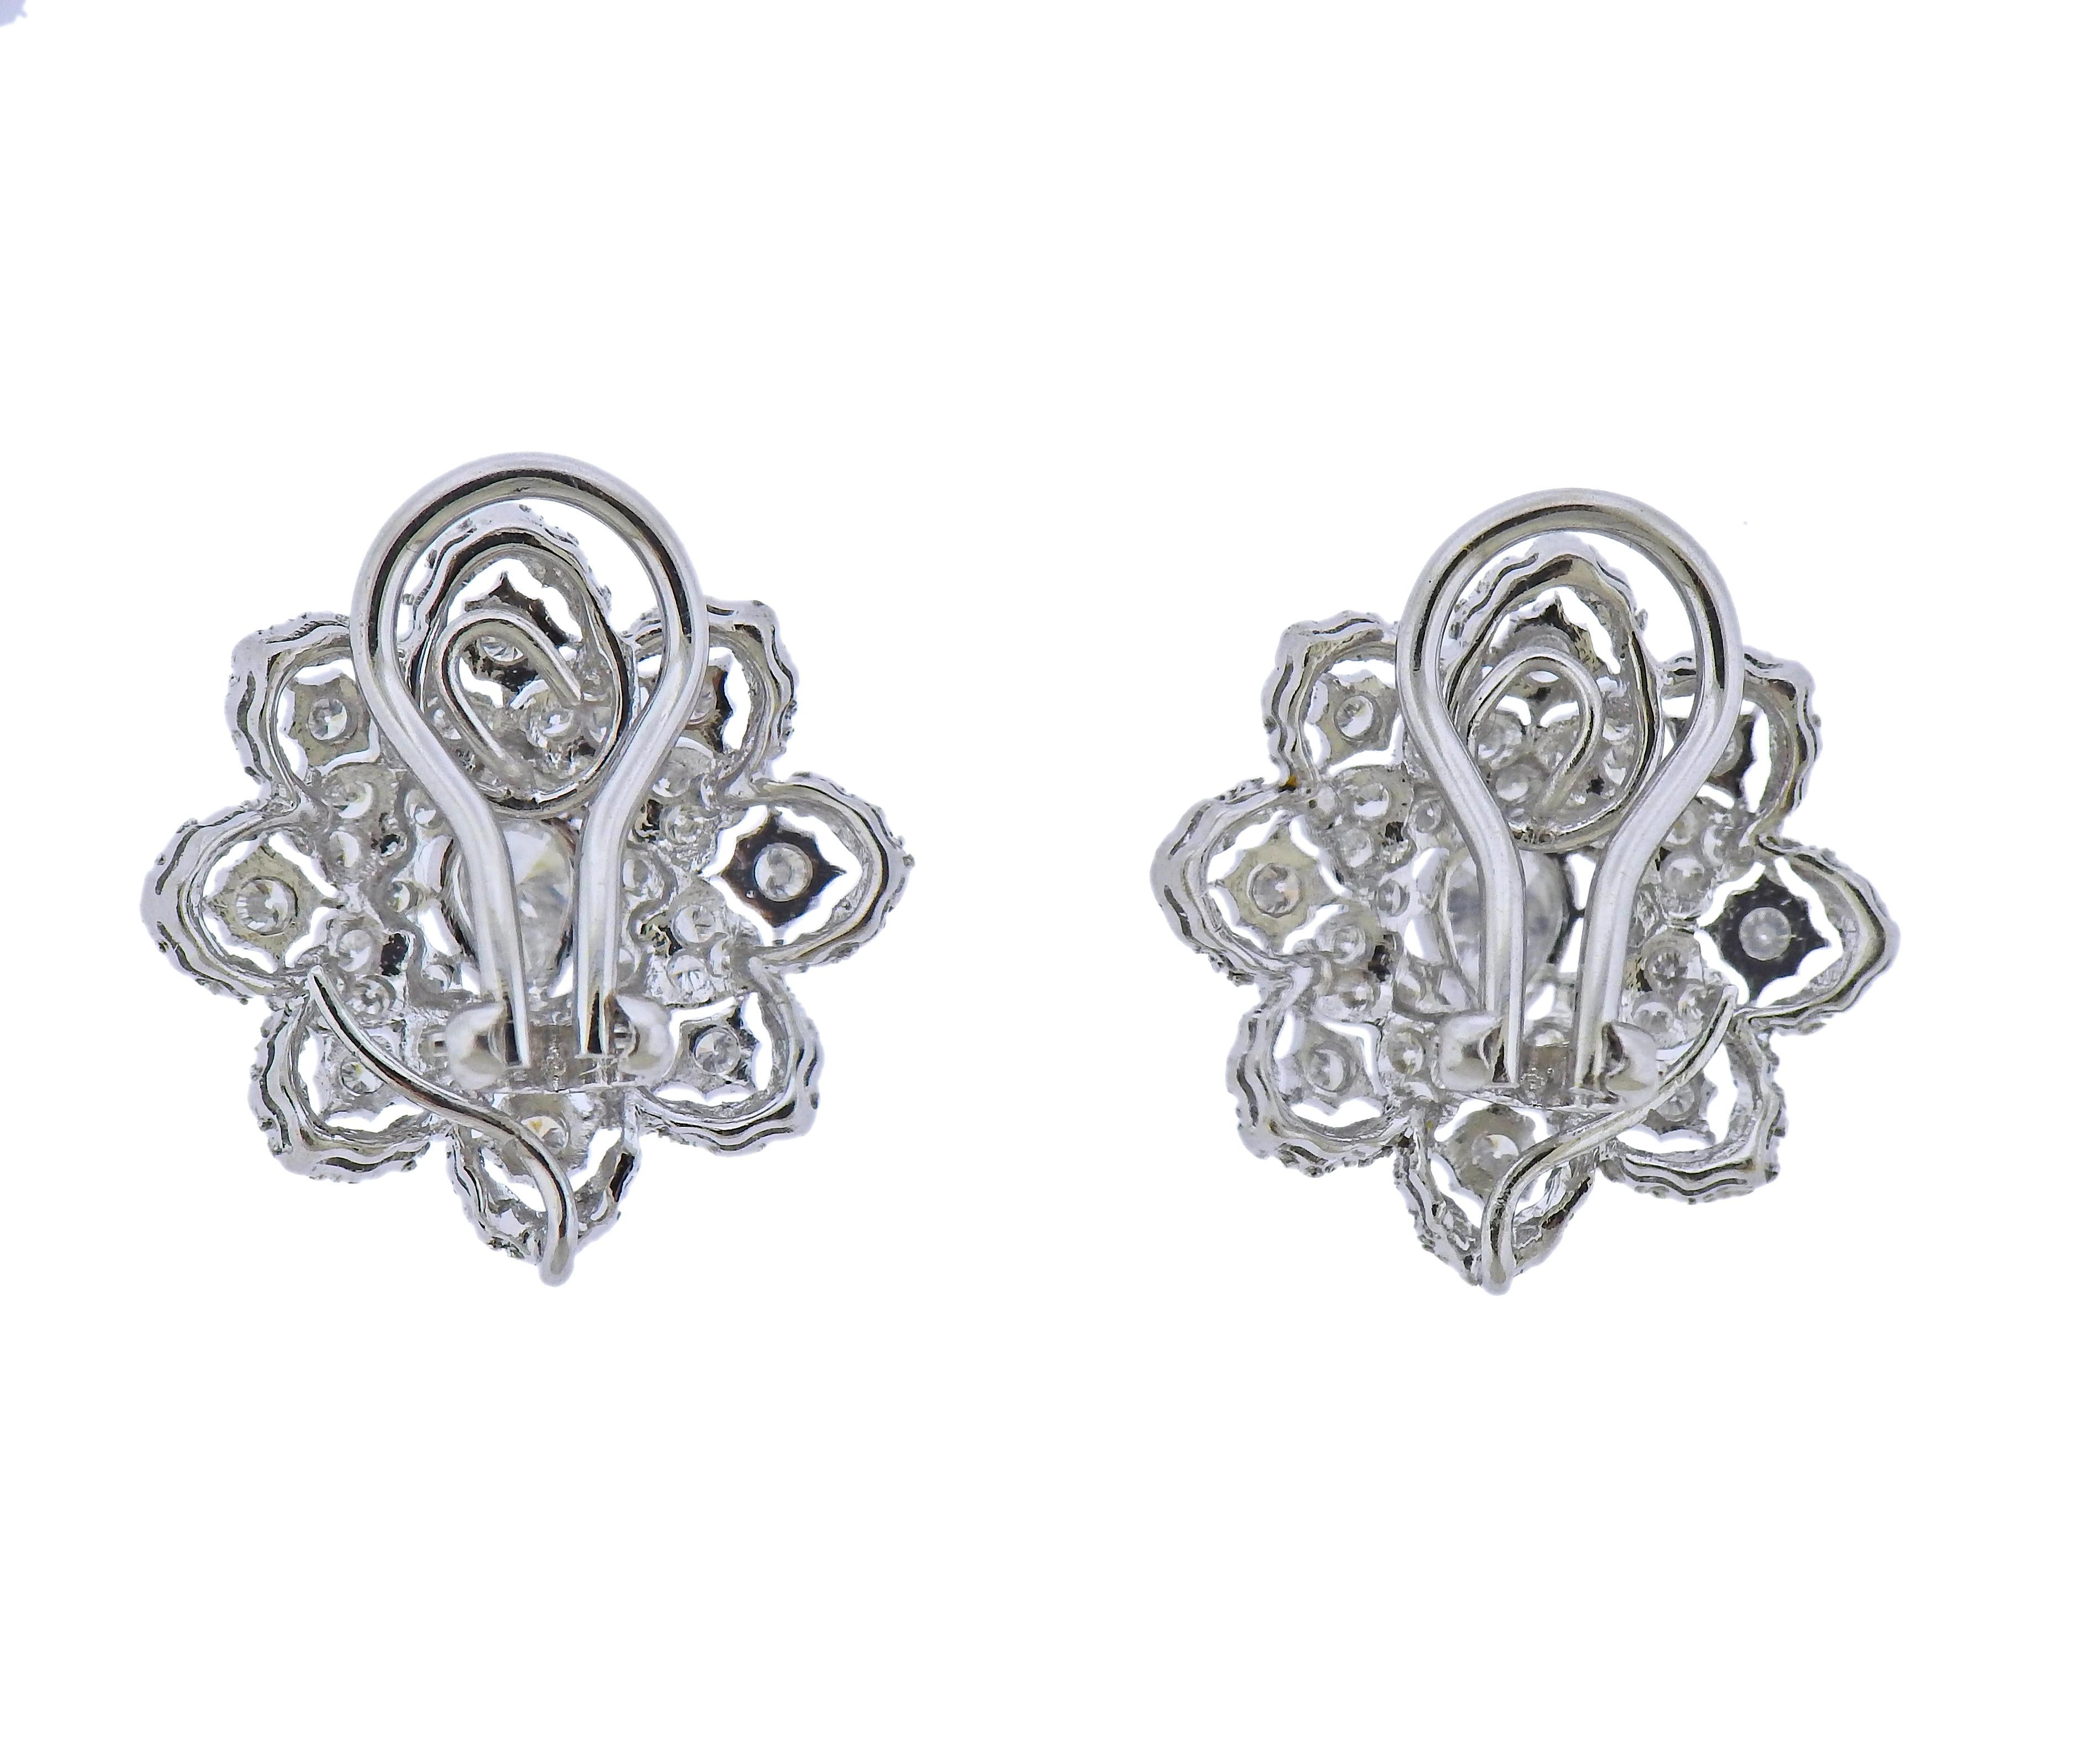 Pair of 18k white gold openwork earrings, set with approx. 1.30-1.40ctw in diamonds. Earrings are 20mm x 21mm. Weight - 10.2 grams. Marked 750.